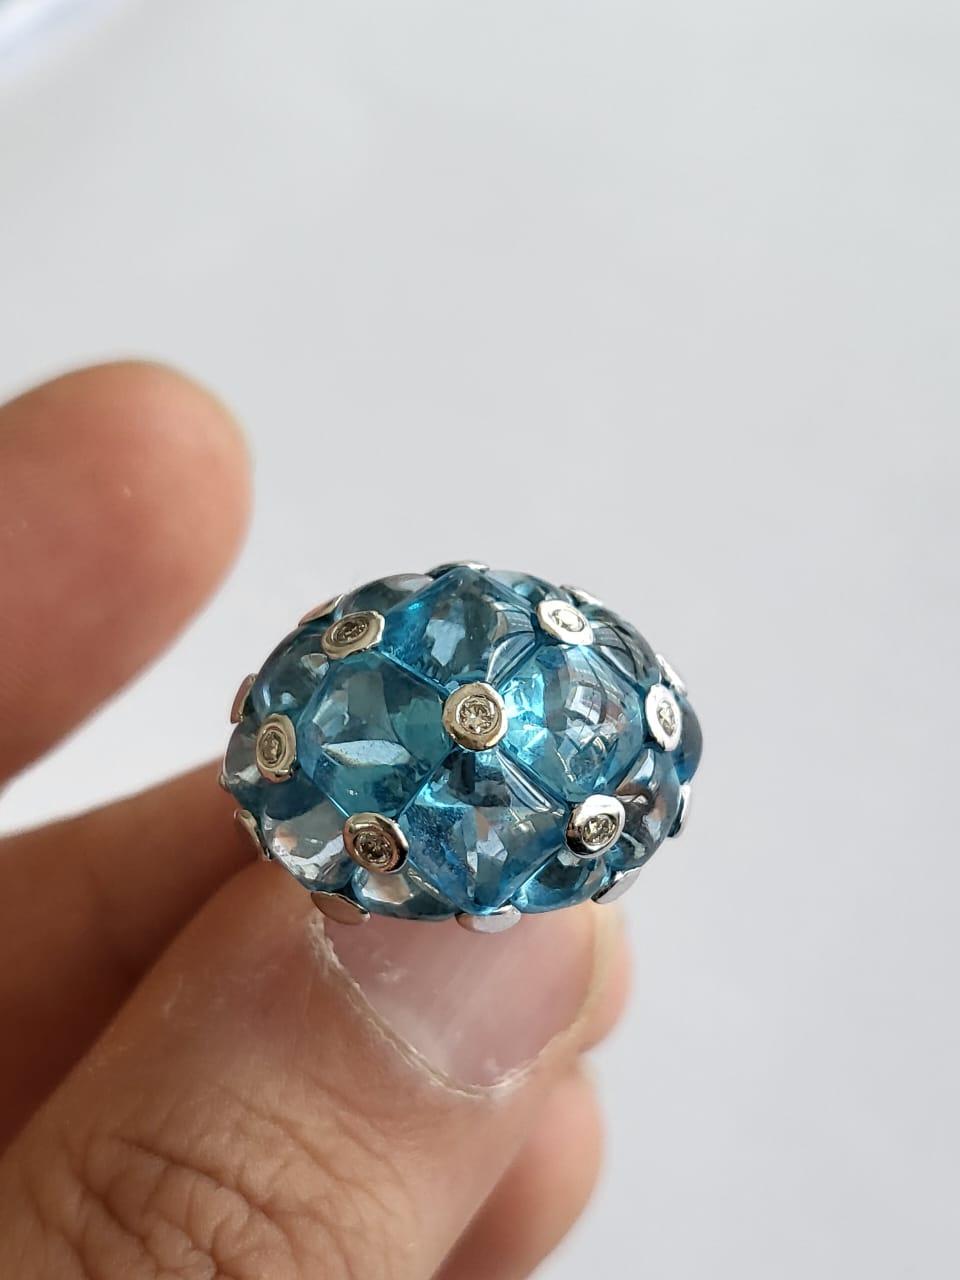 A very gorgeous and beautiful, Aquamarine Dome Cluster Ring set in Platinum 900 and Diamonds. The weight of the Aquamarines in 14.73 carats. The Diamonds weight is 0.13 carats. The dimensions of 1.90cm x 2.00cm x 1.10cm (L x W x D). The ring is made